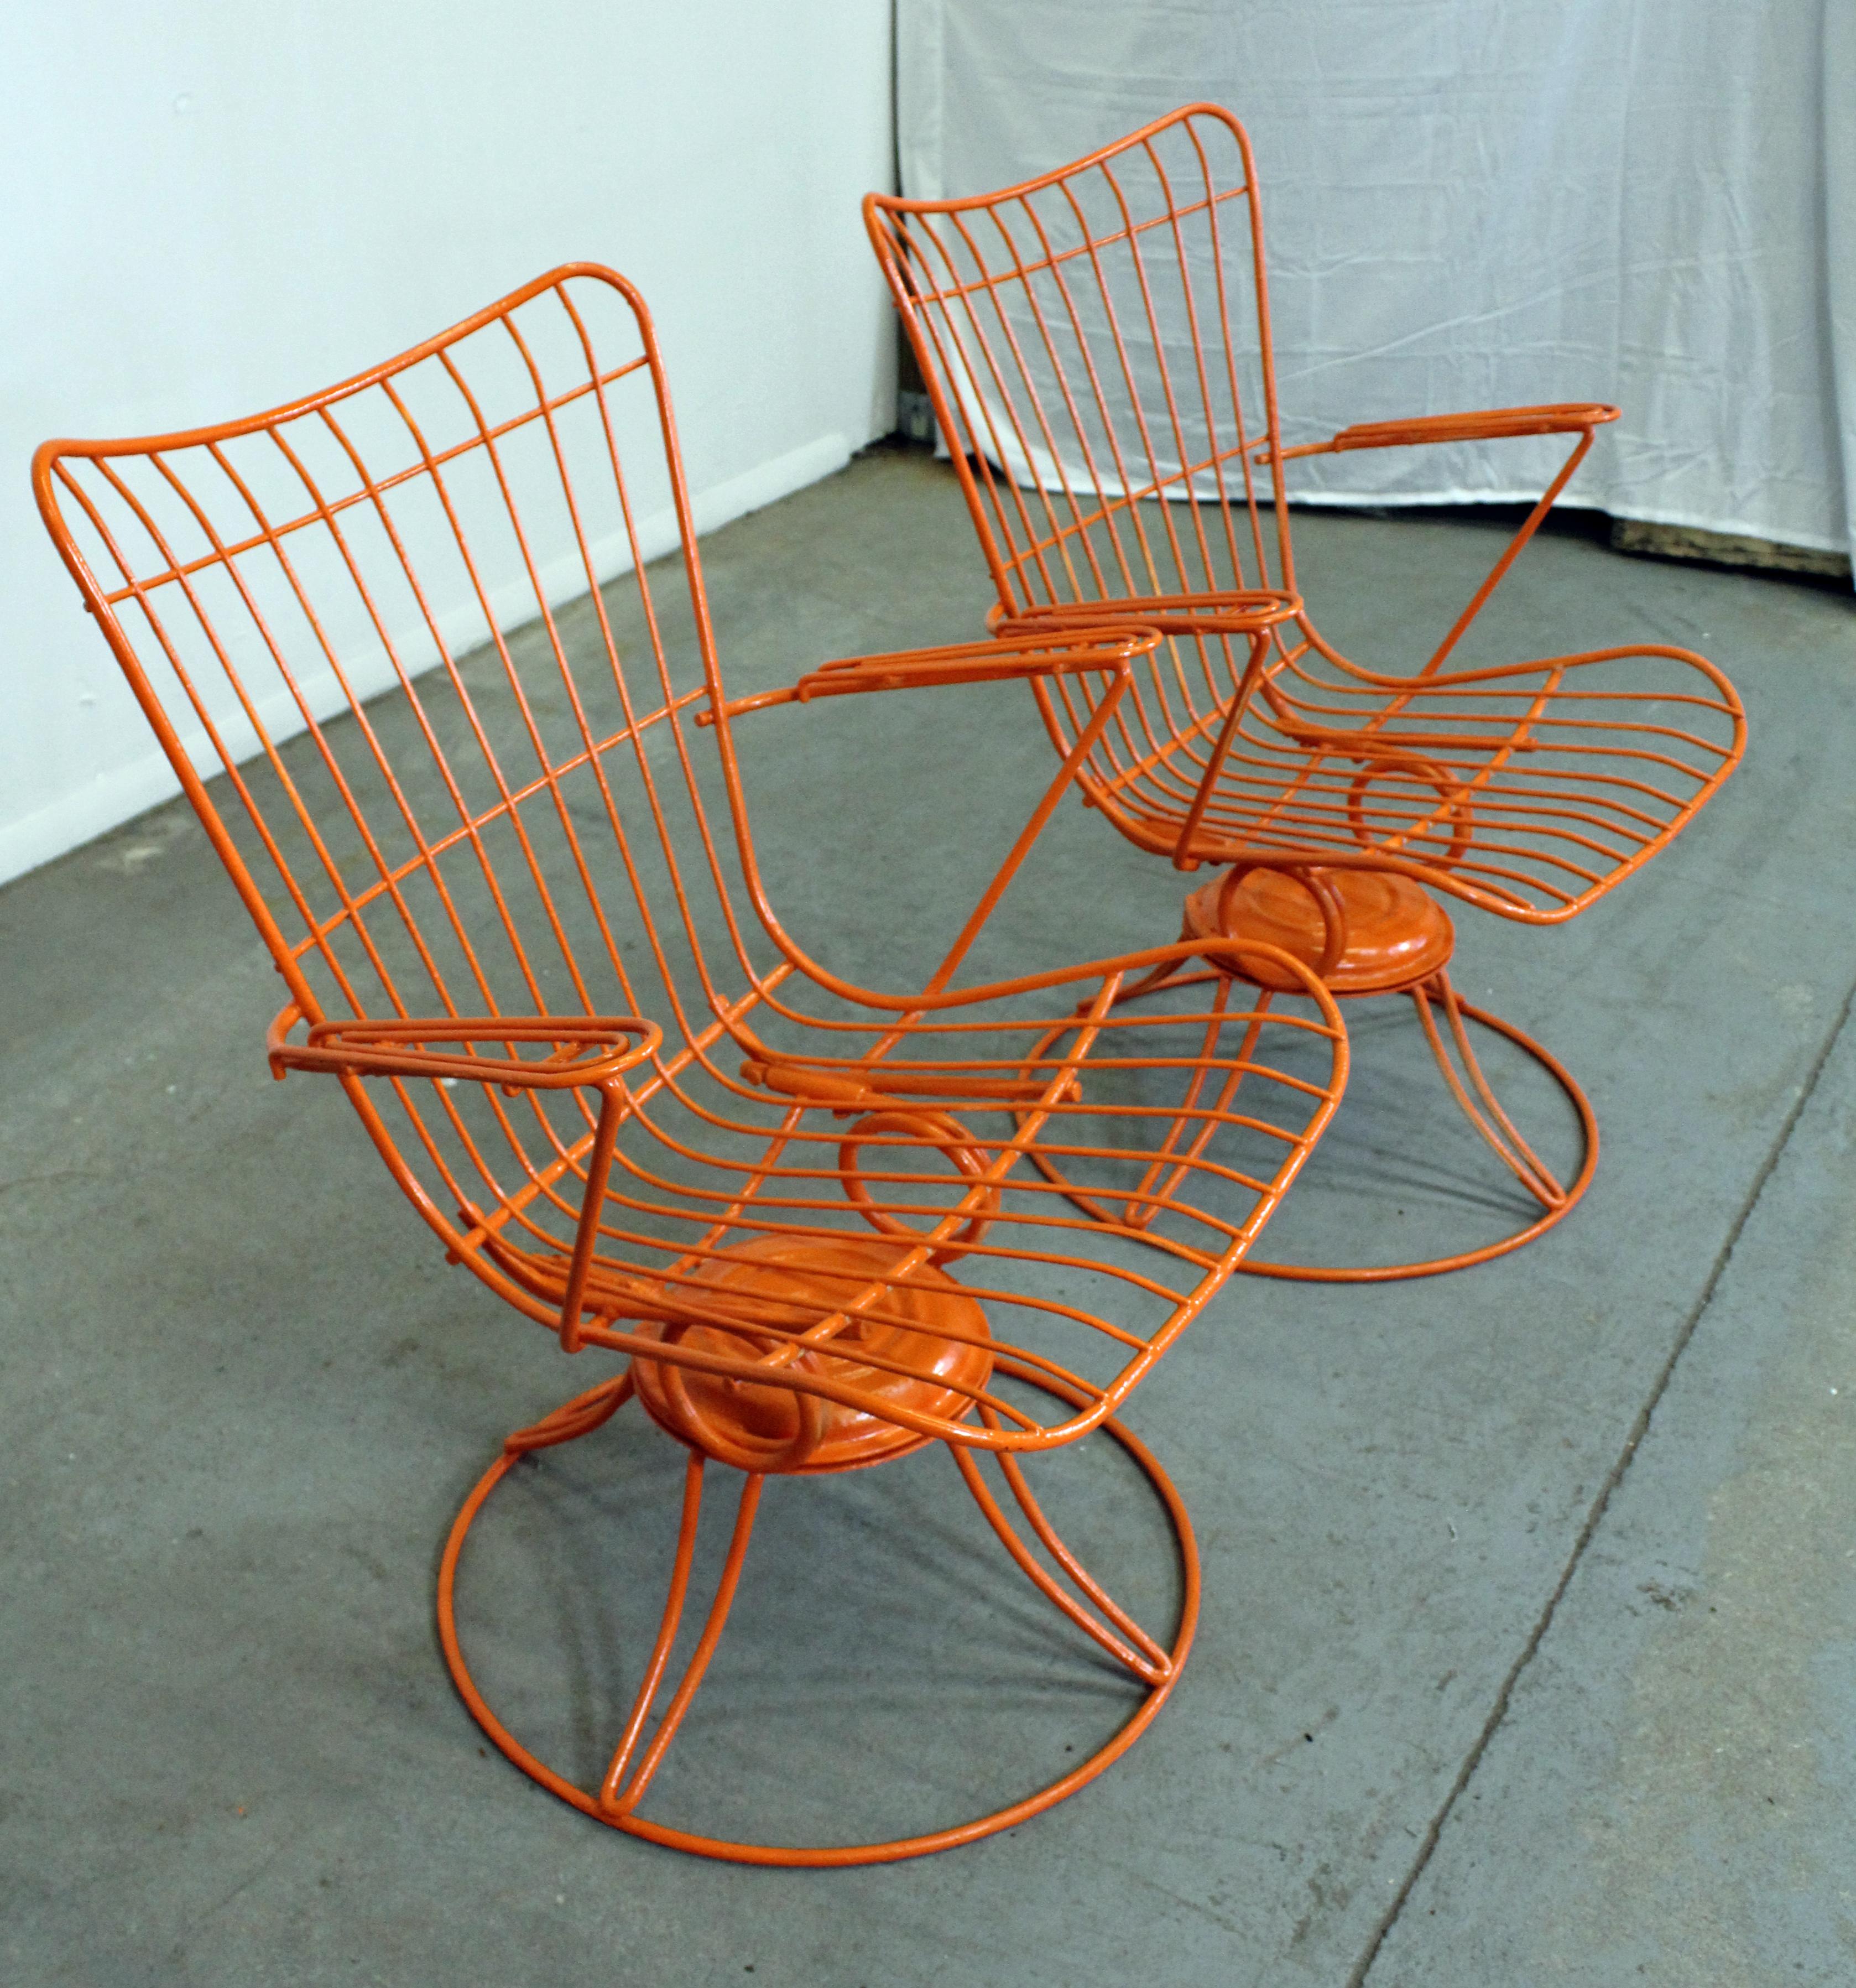 What a find. Offered is a pair of midcentury wrought iron swivel/rocker patio lounge chairs (model 36) made by Homecrest Bottemiller, circa 1968. These chairs swivel and rock, and have been repainted in an atomic orange. They're in good condition